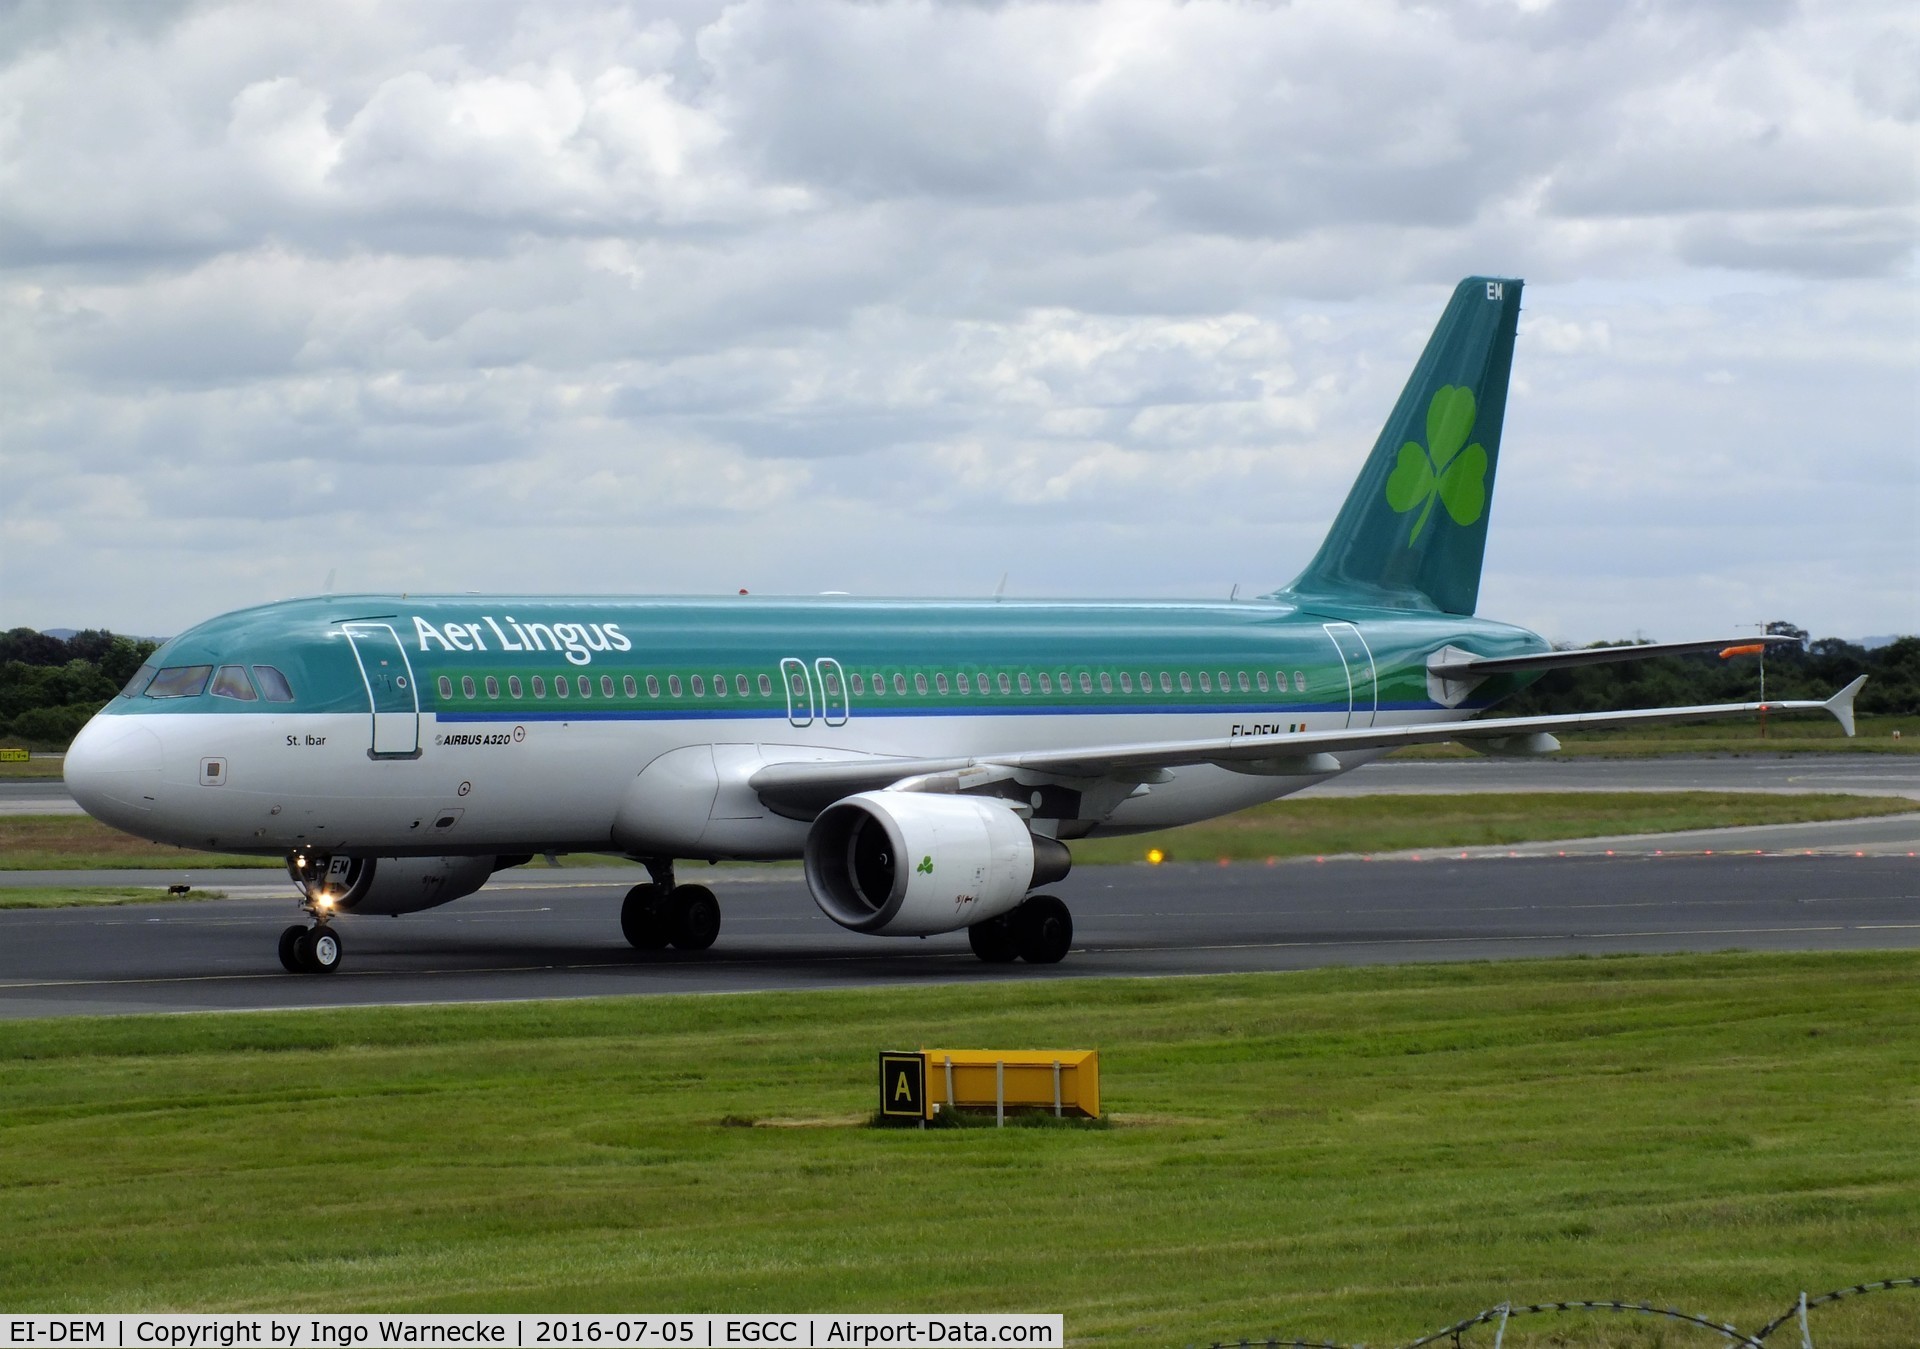 EI-DEM, 2005 Airbus A320-214 C/N 2411, Airbus A320-214 of Aer Lingus at Manchester airport